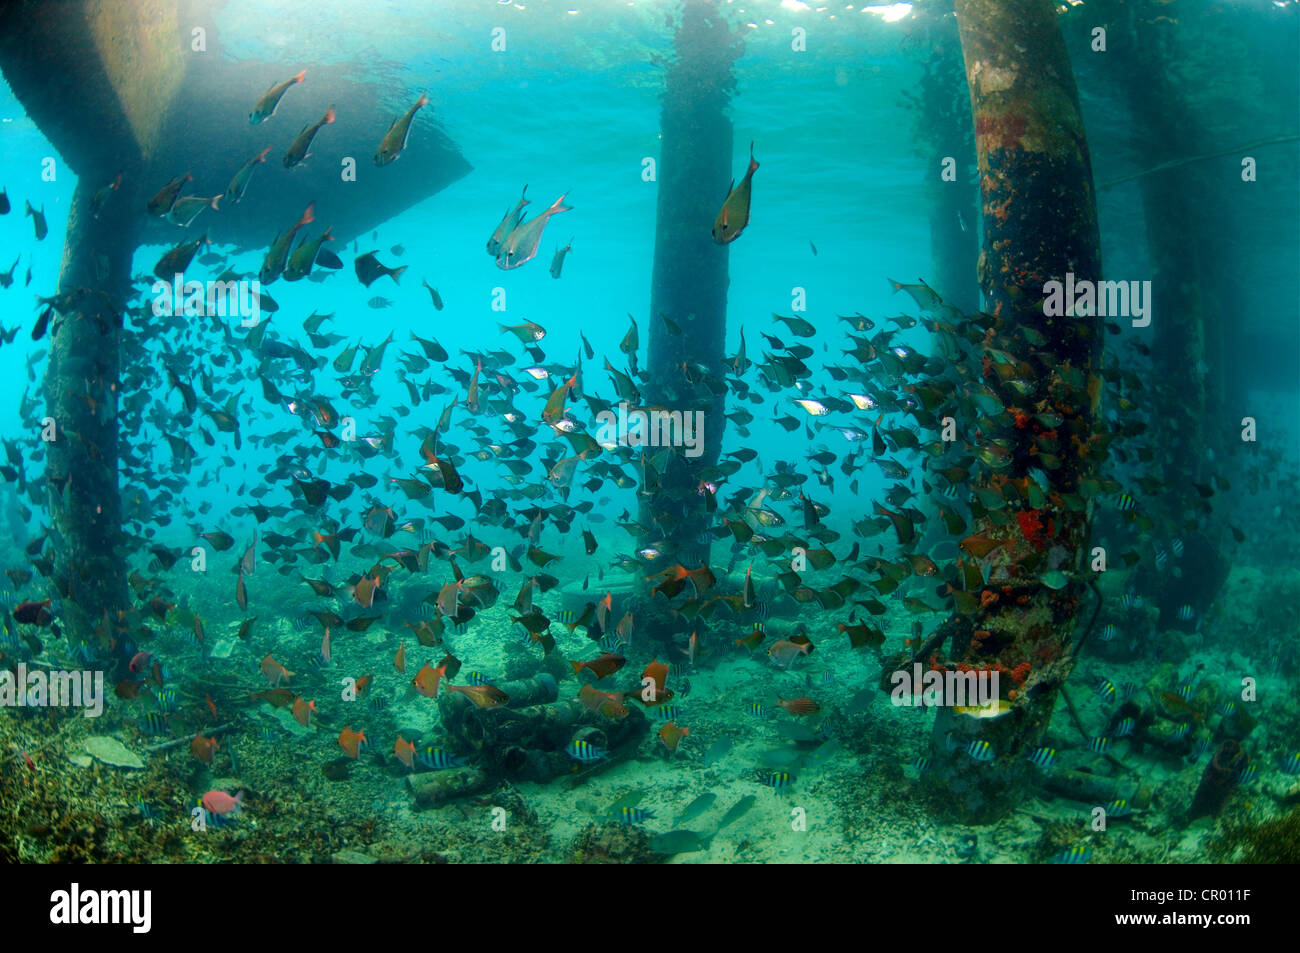 School of tropical fishes, Redang Island, Malaysia, Southeast Asia Stock Photo